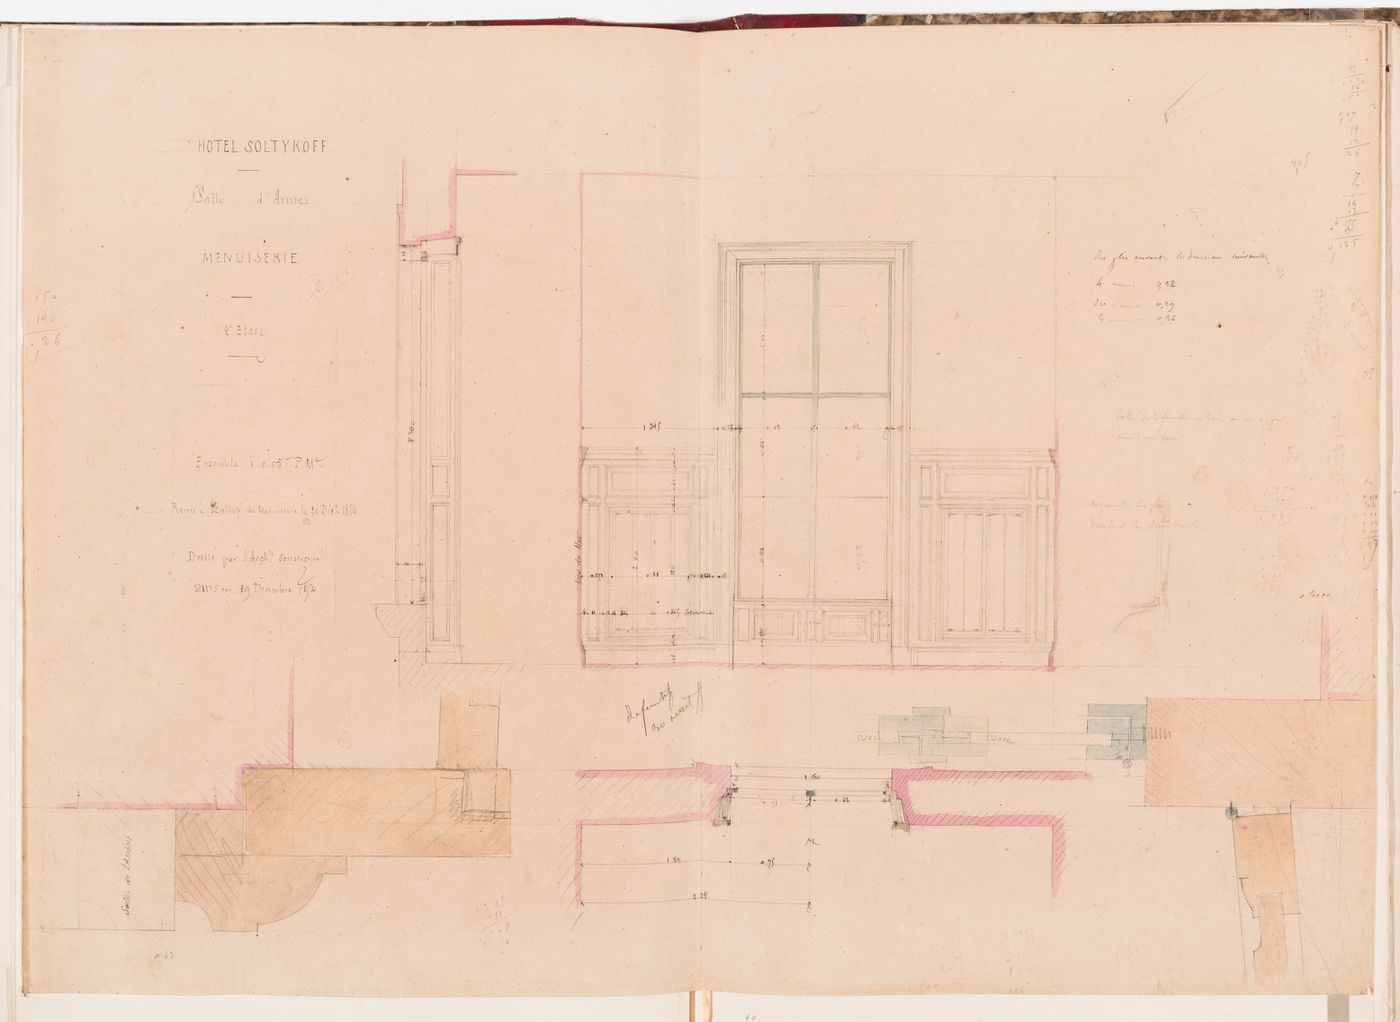 Plan, section, elevation and full-scale joinery details for a window and a wall for the "salle d'armes" on the second floor, Hôtel Soltykoff